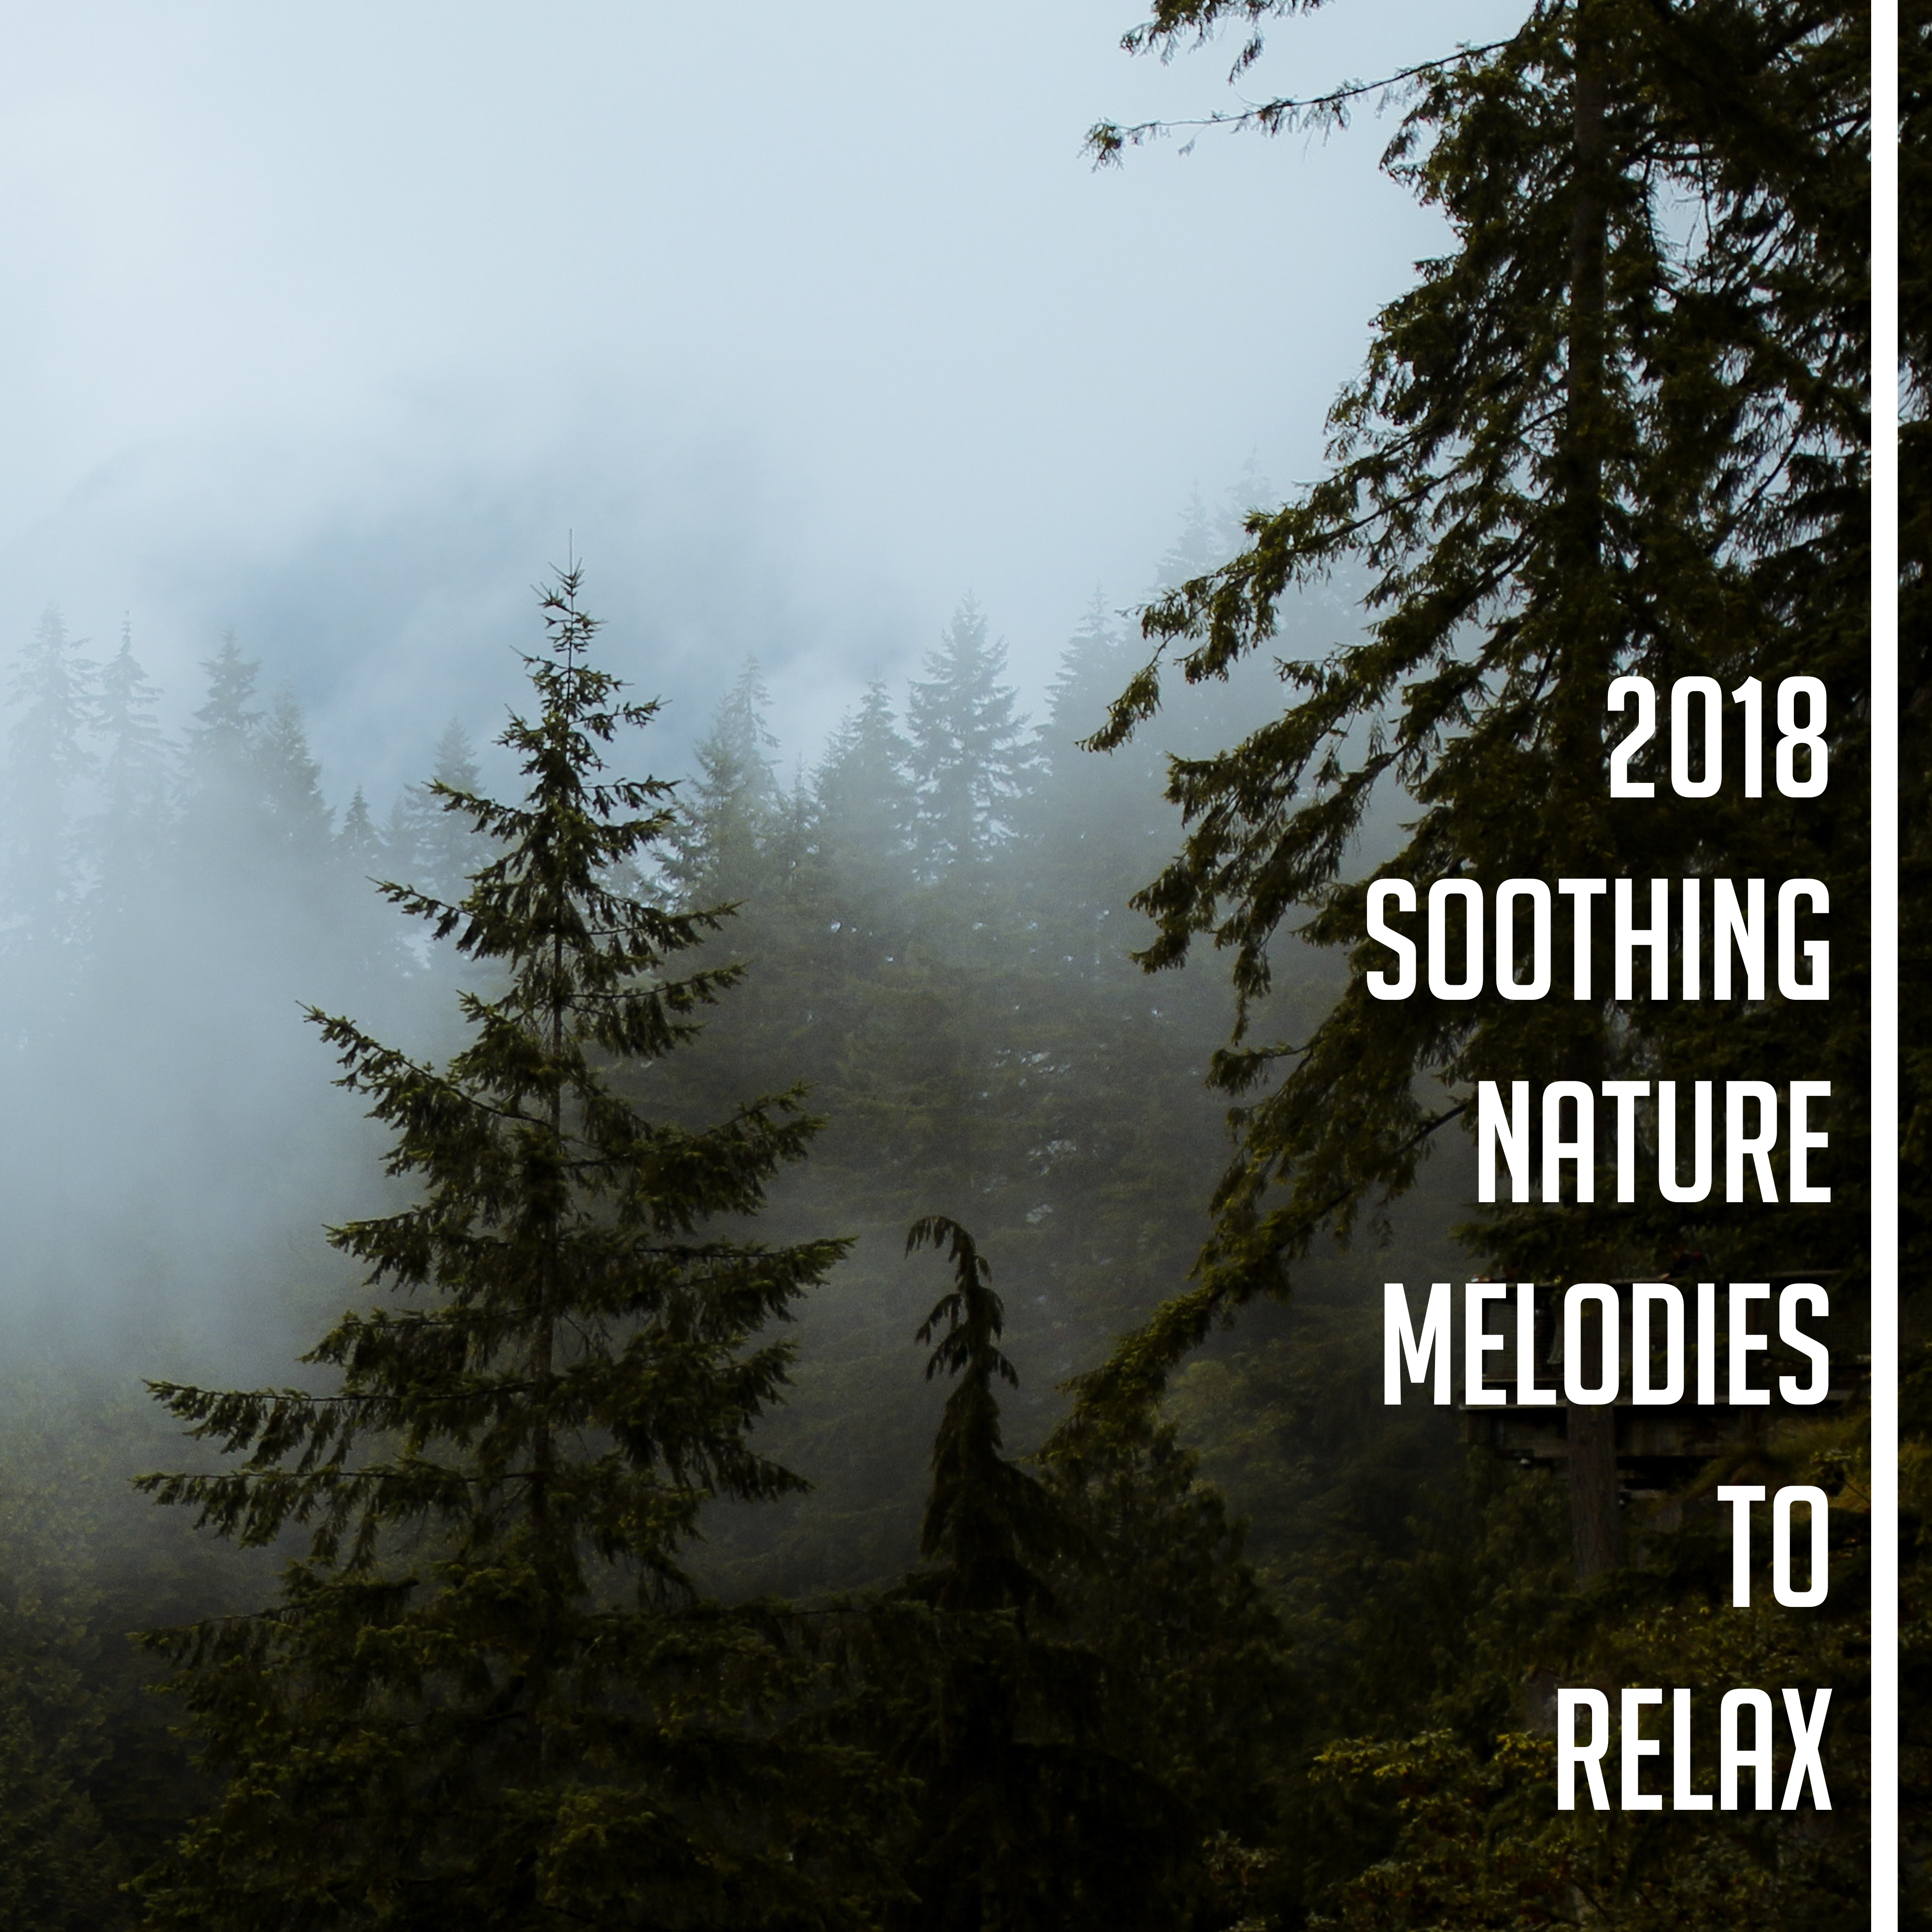 2018 Soothing Nature Melodies to Relax